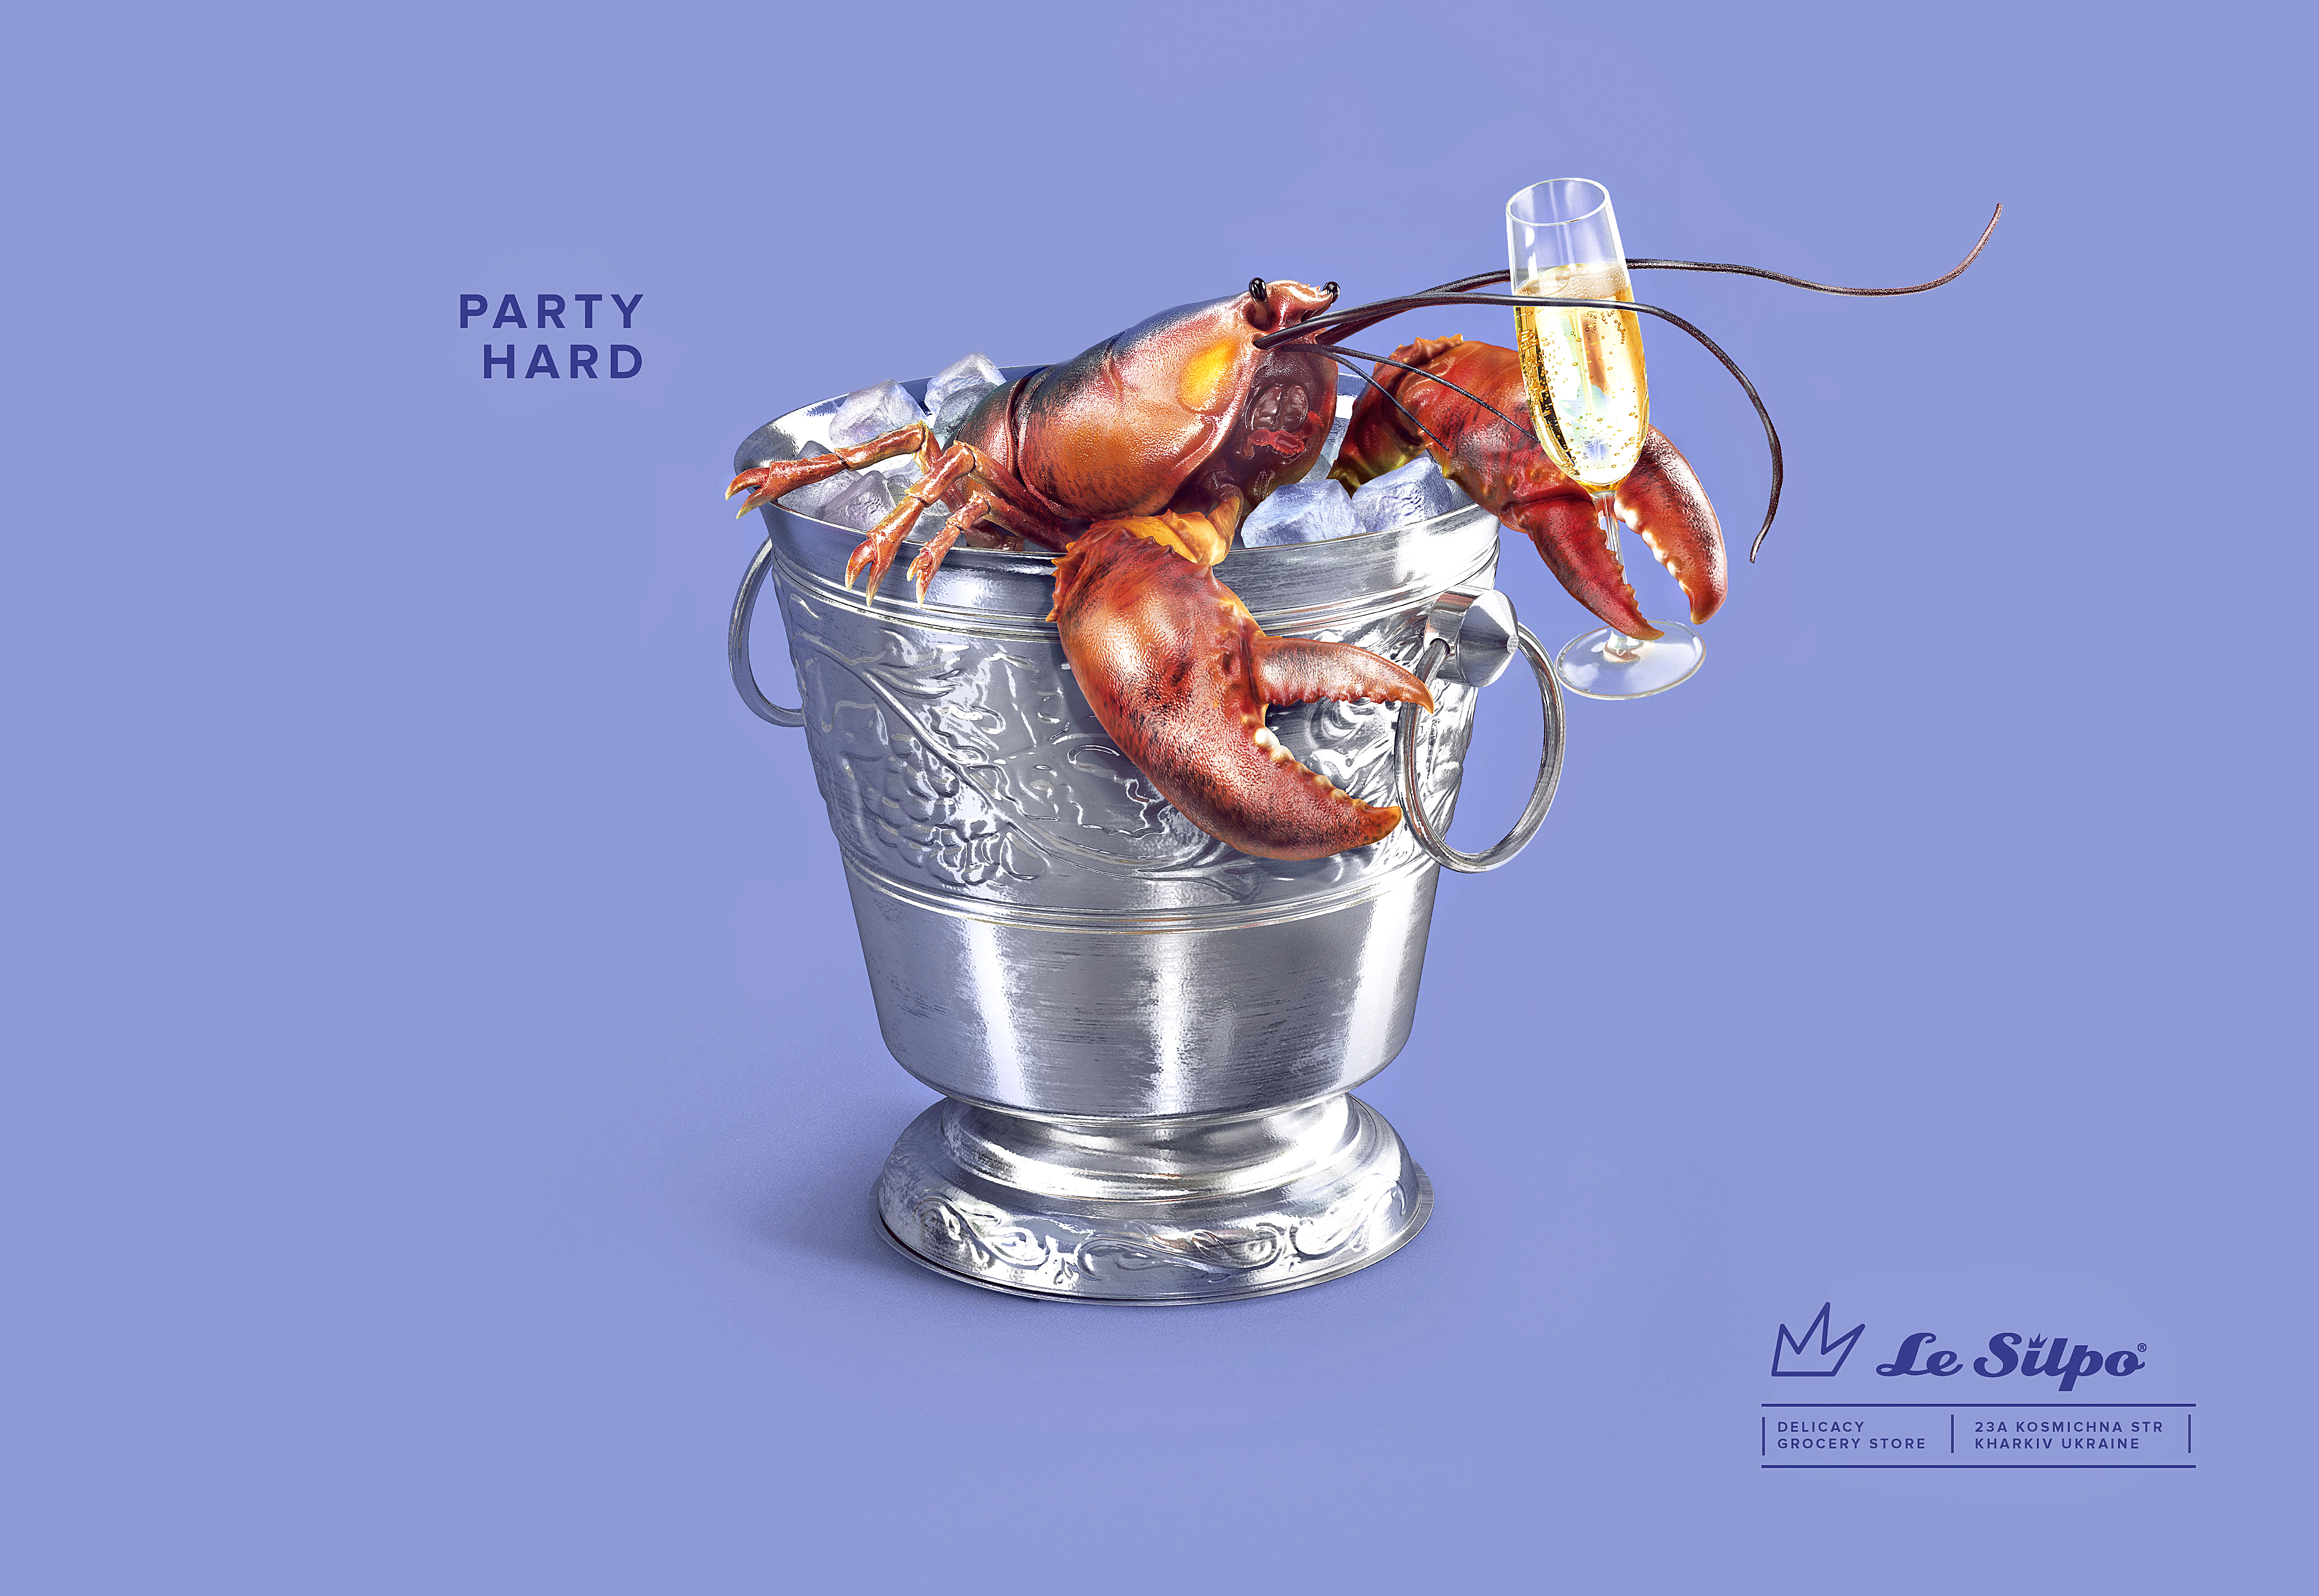 Party Hard. Lobster